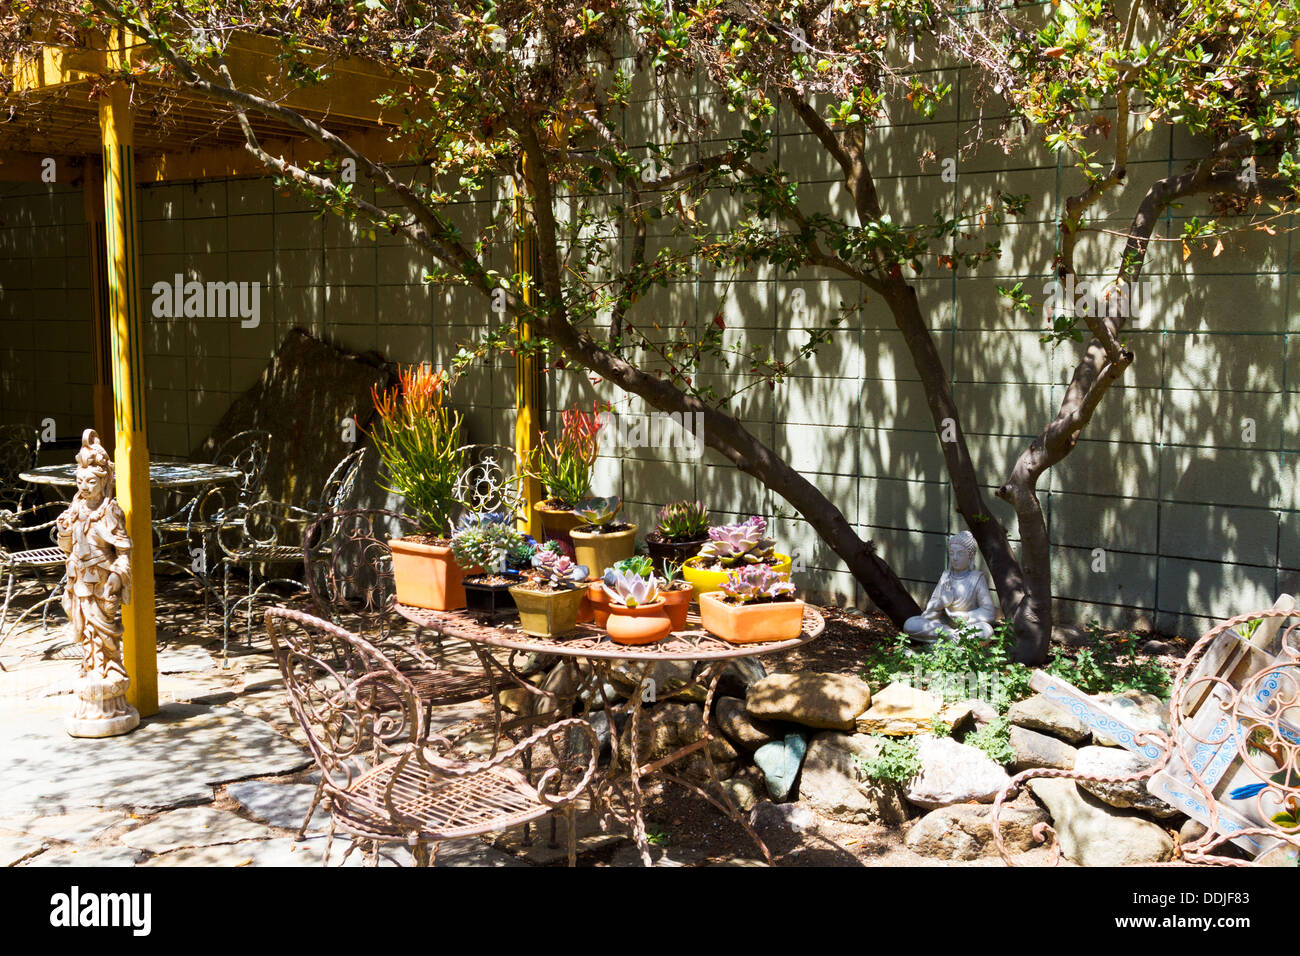 Succulents and wrought iron furniture display on a sunlit patio with interesting shadows. Stock Photo